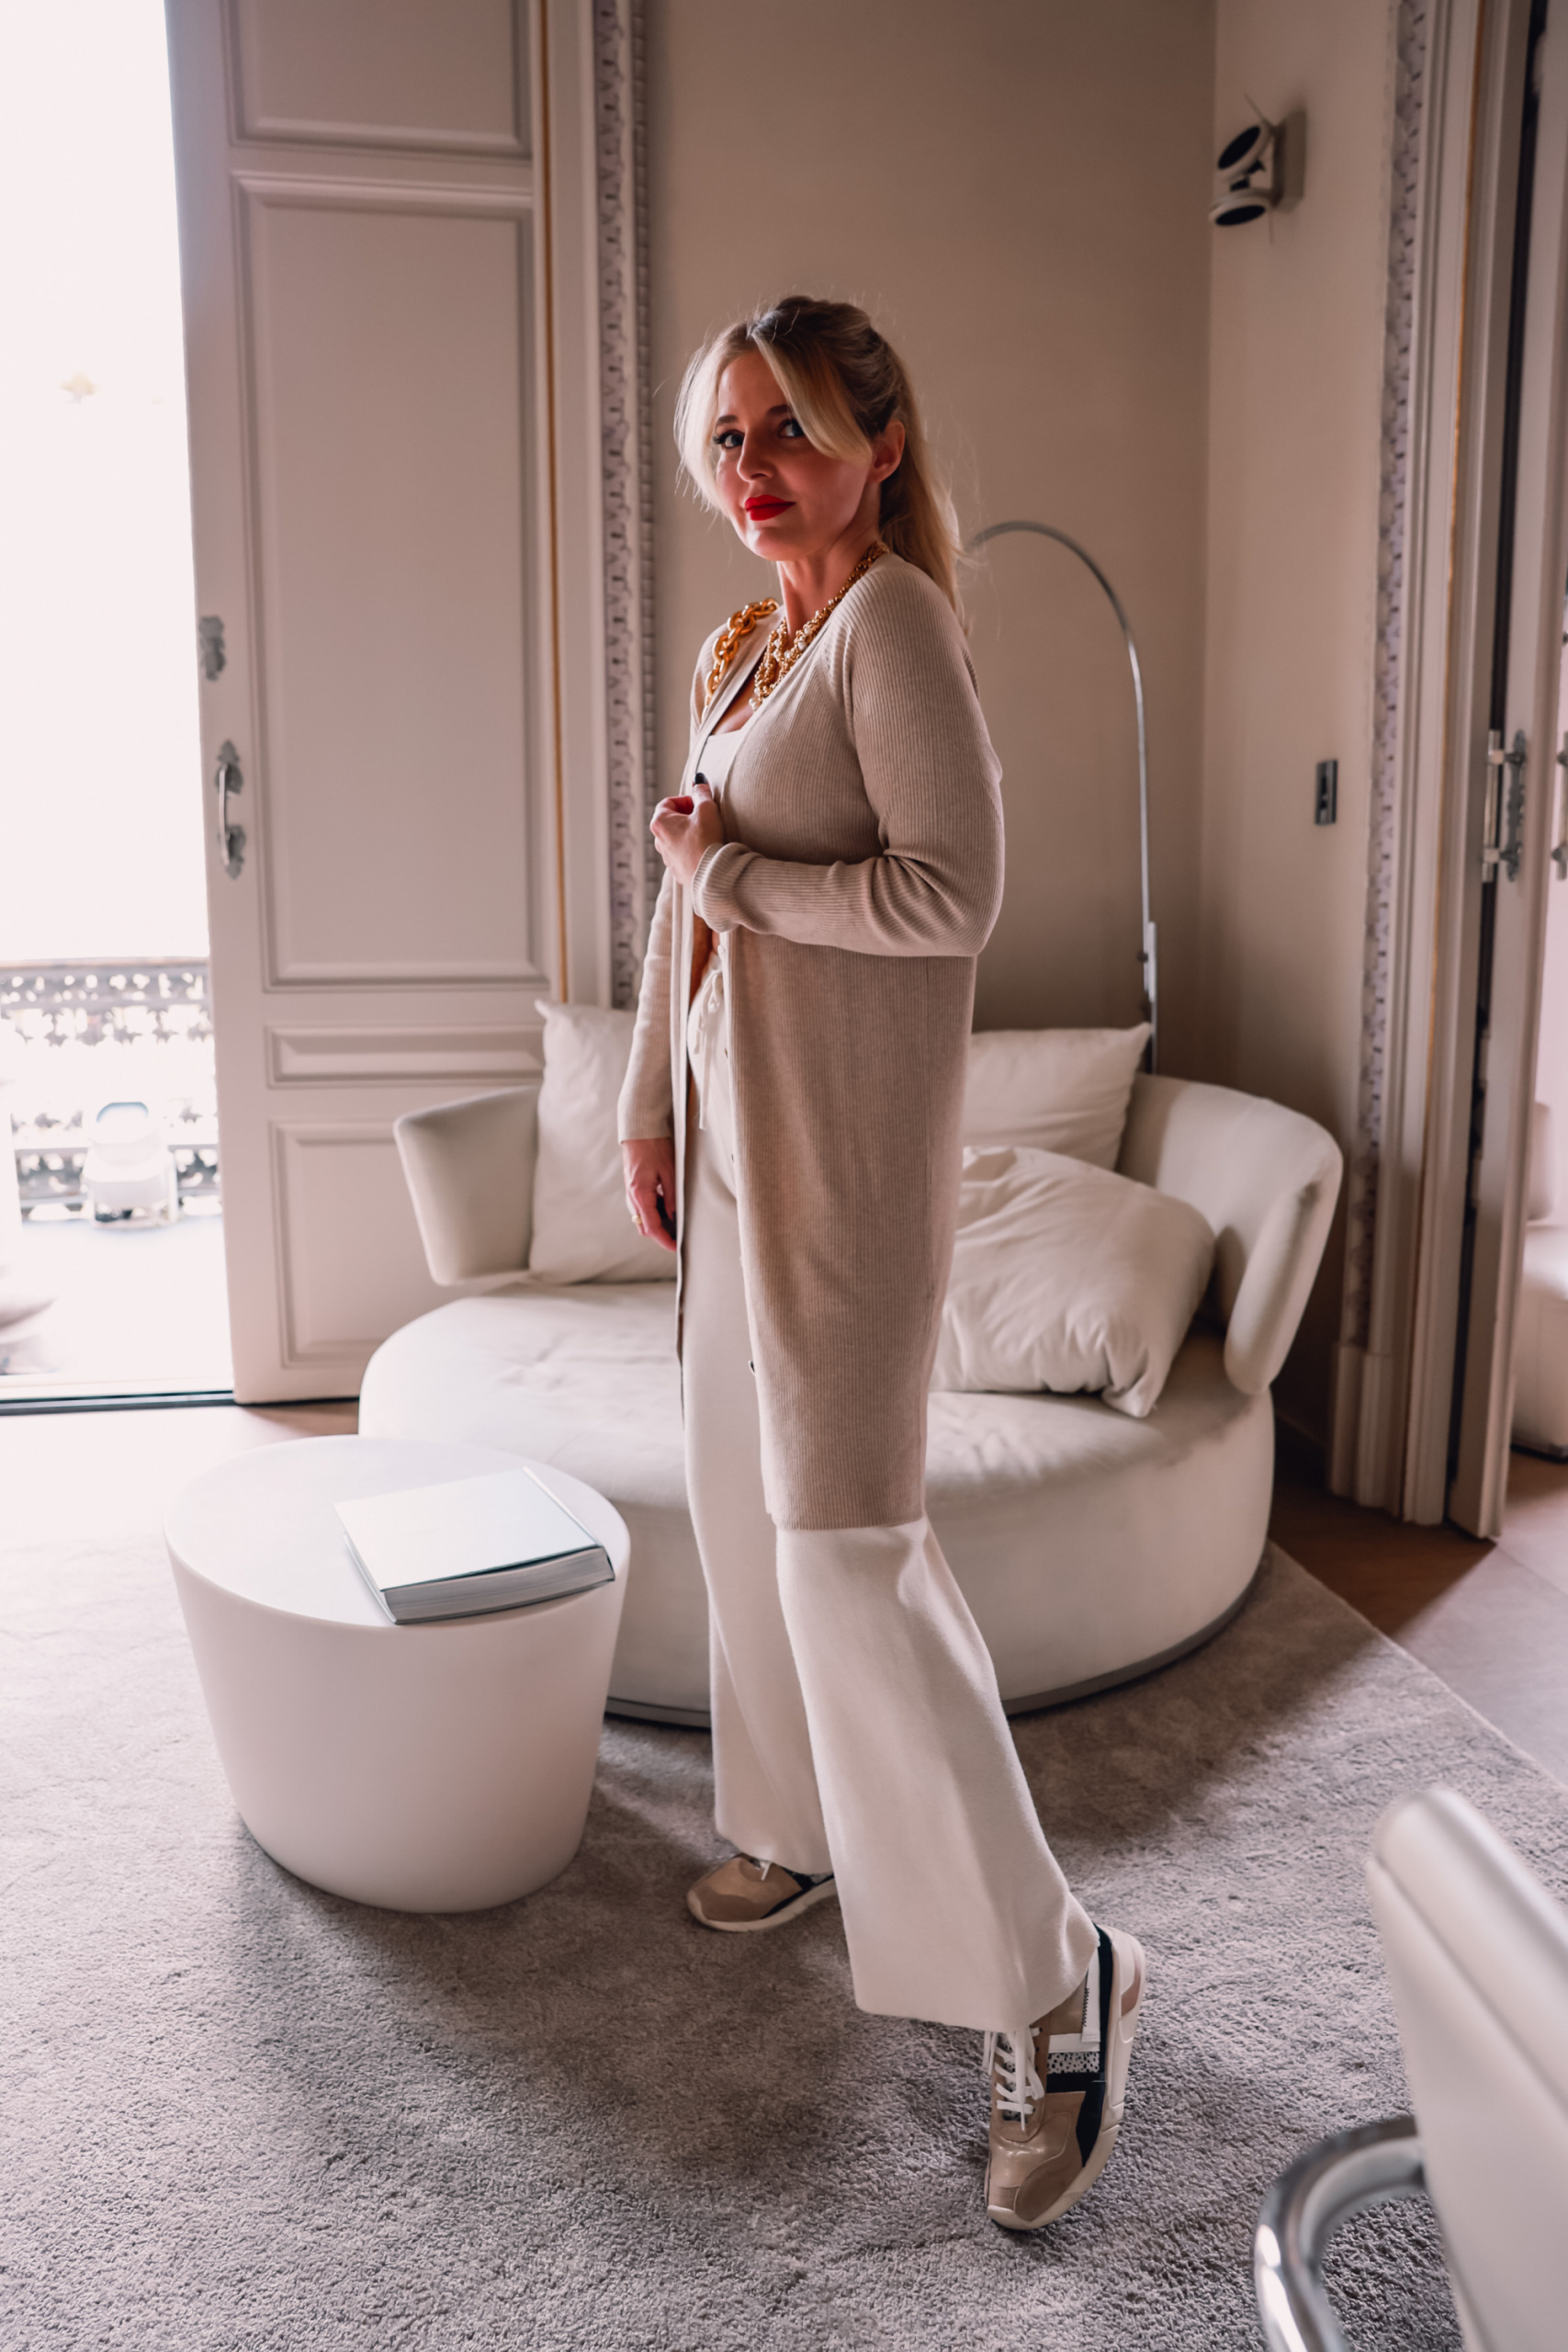 stylish loungewear, loungewear from couch to curb, how to transition loungewear, erin busbee, mango wide leg lounge pants, gola sneakers, mango cardigan, white cami crop top, el palauet, barcelona, spain